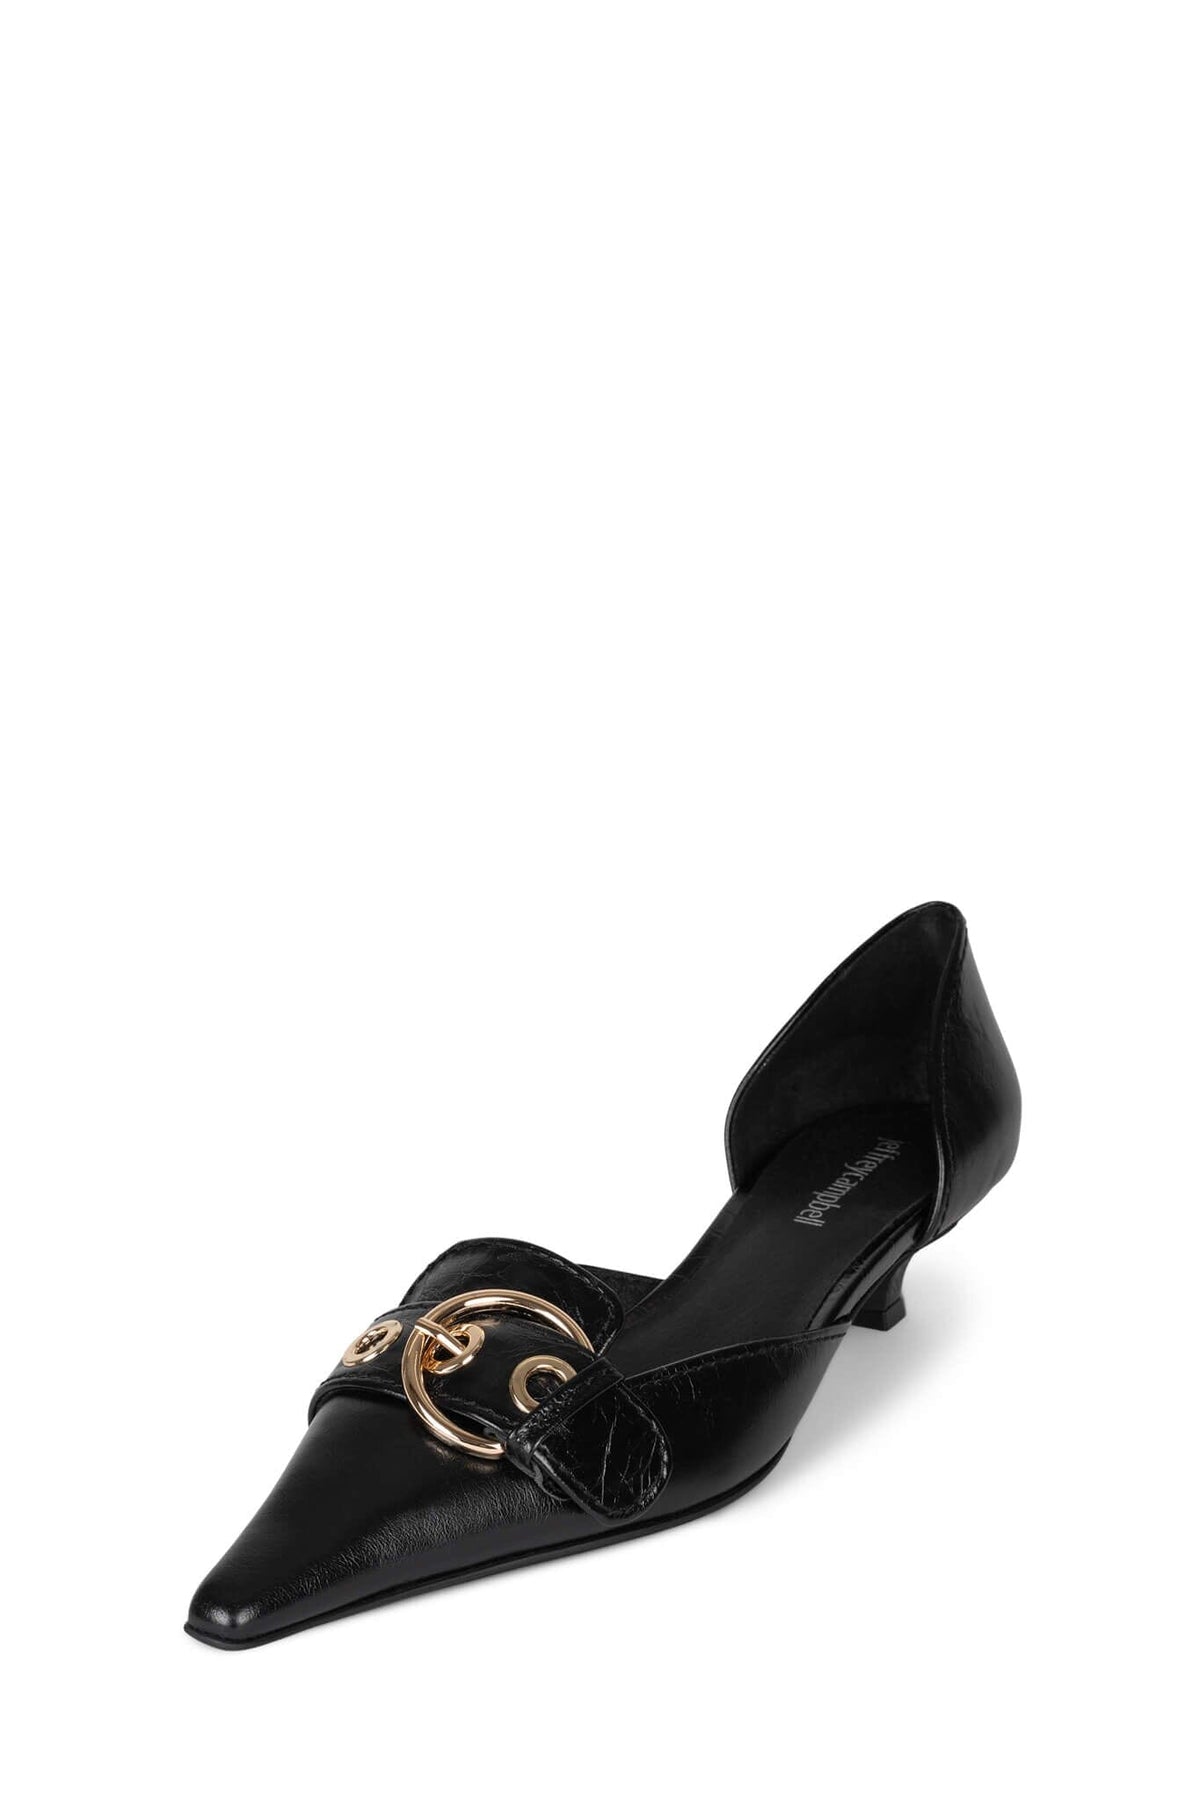 SMOOTH Jeffrey Campbell Loafers Black Gold